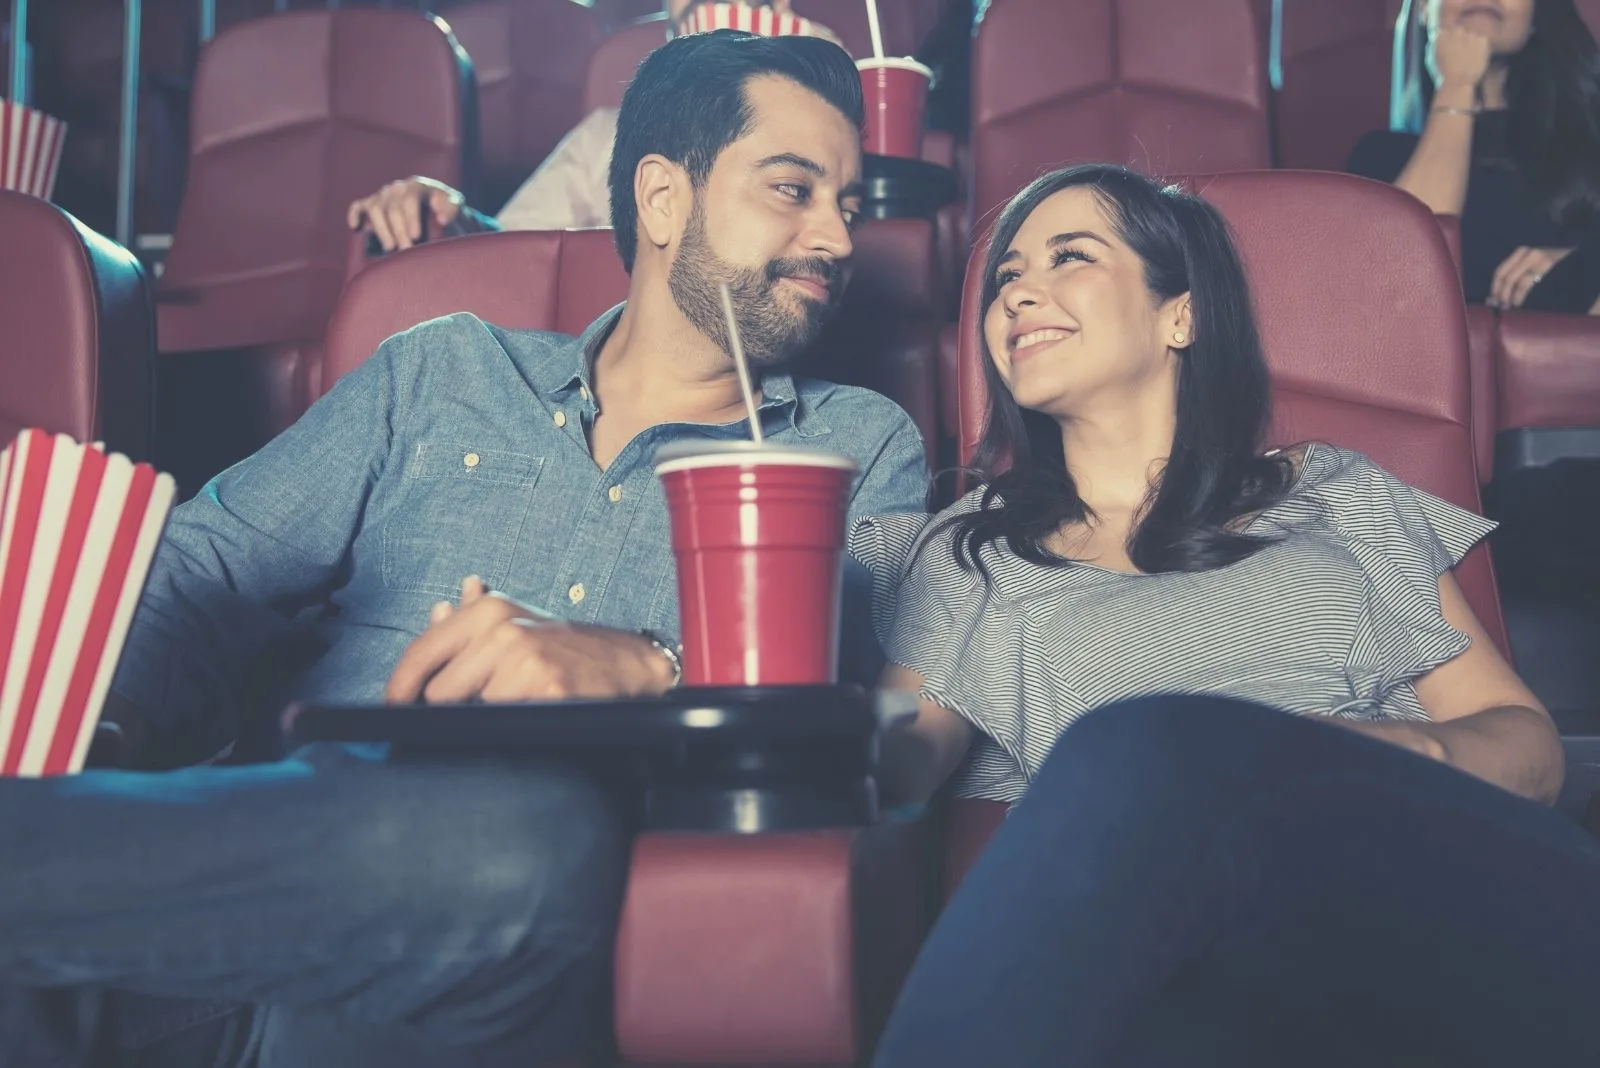 married couple dating watching movies in the moviehouse smiling at each other